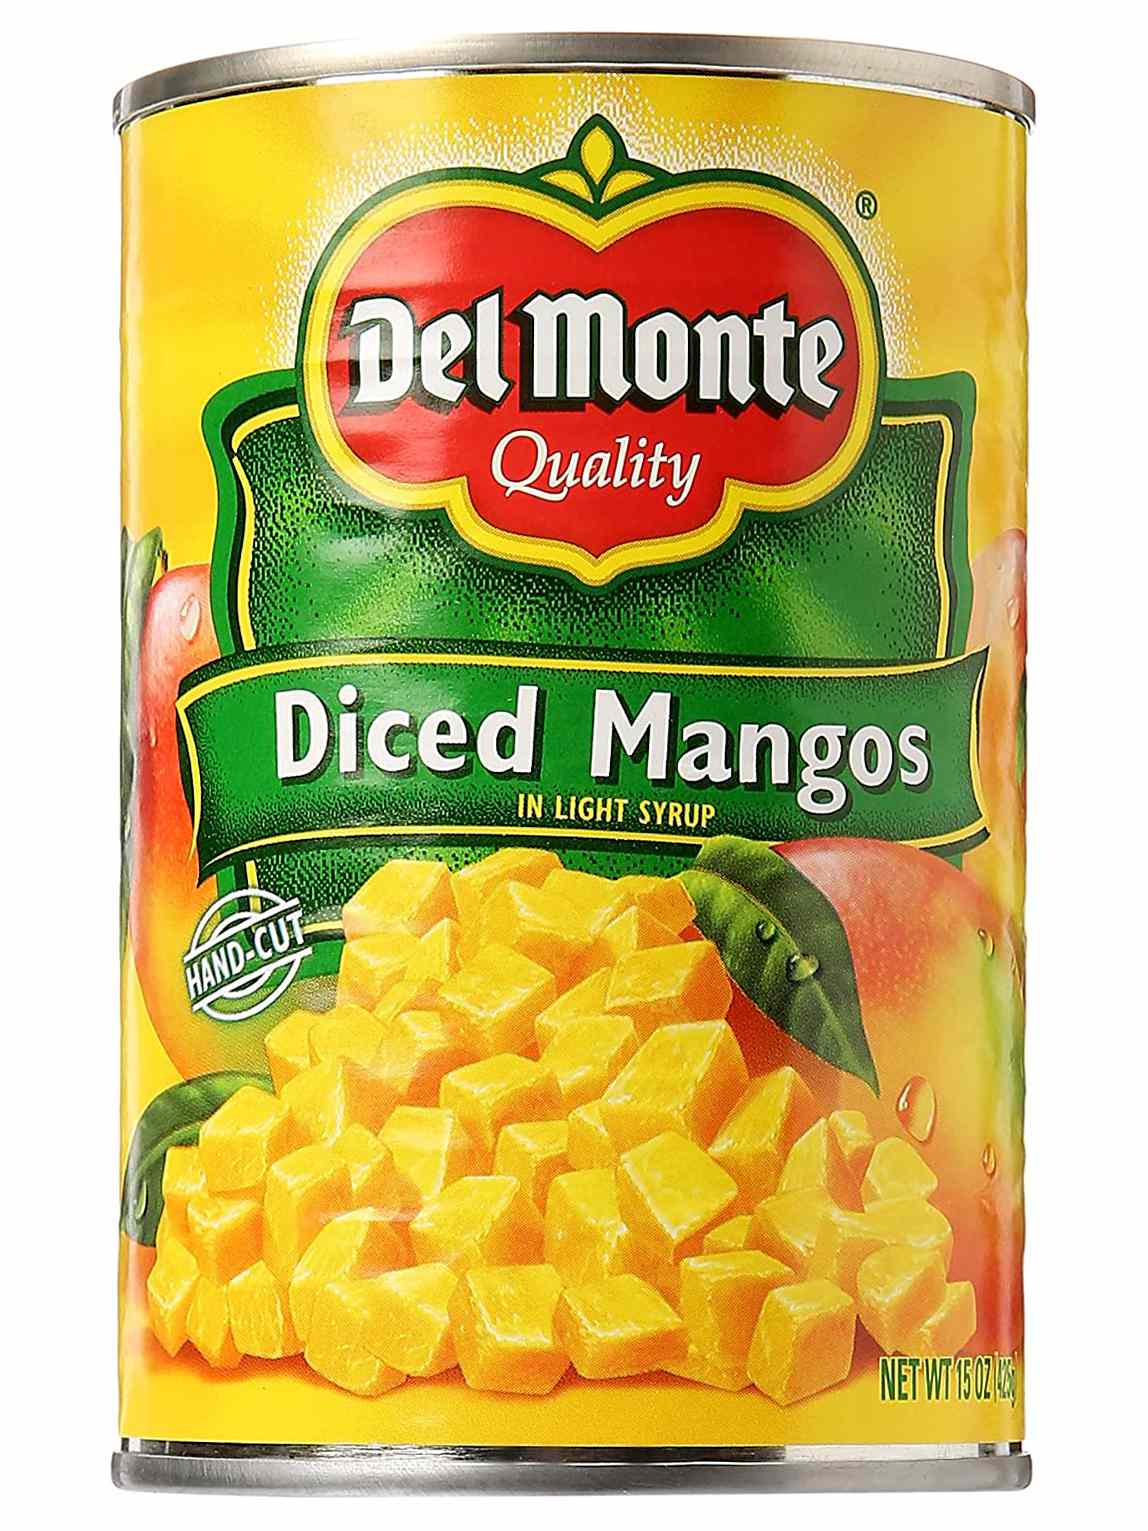 Del Monte Diced Mangos in Light Syrup